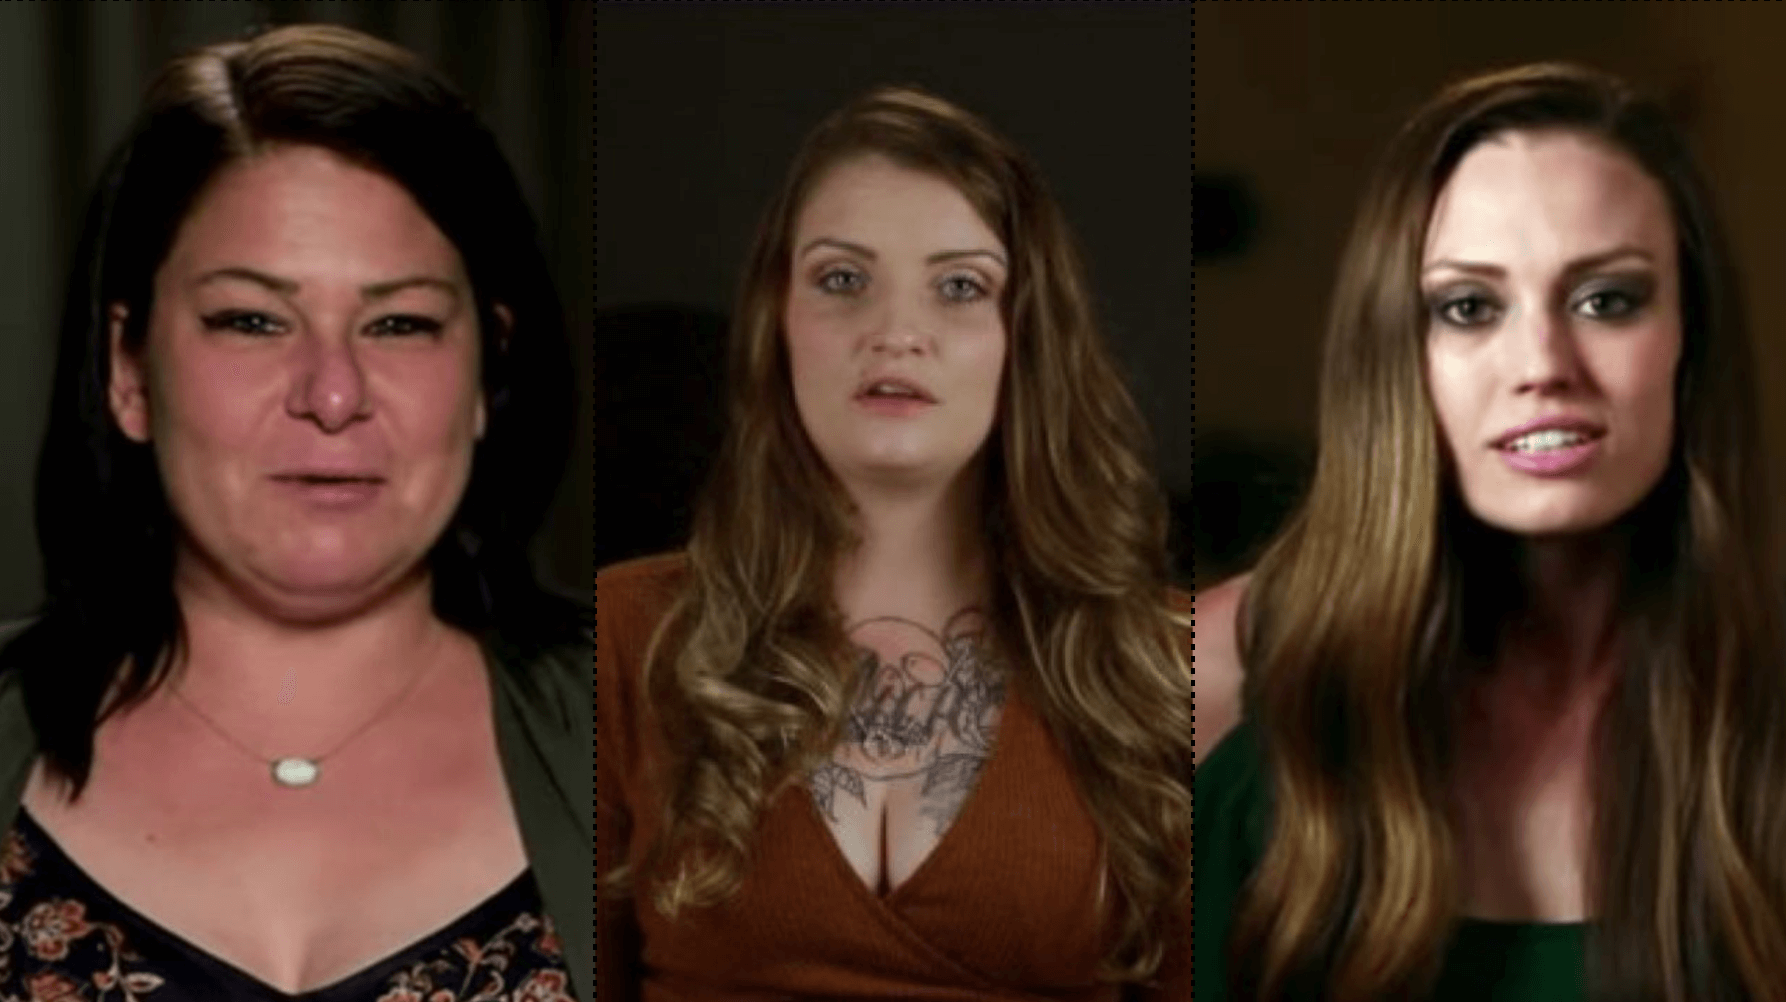 Spoiler Alert: 3 Of The 4 Female Ex-Cons From ‘Life After Lockup’ Are Back In Prison!